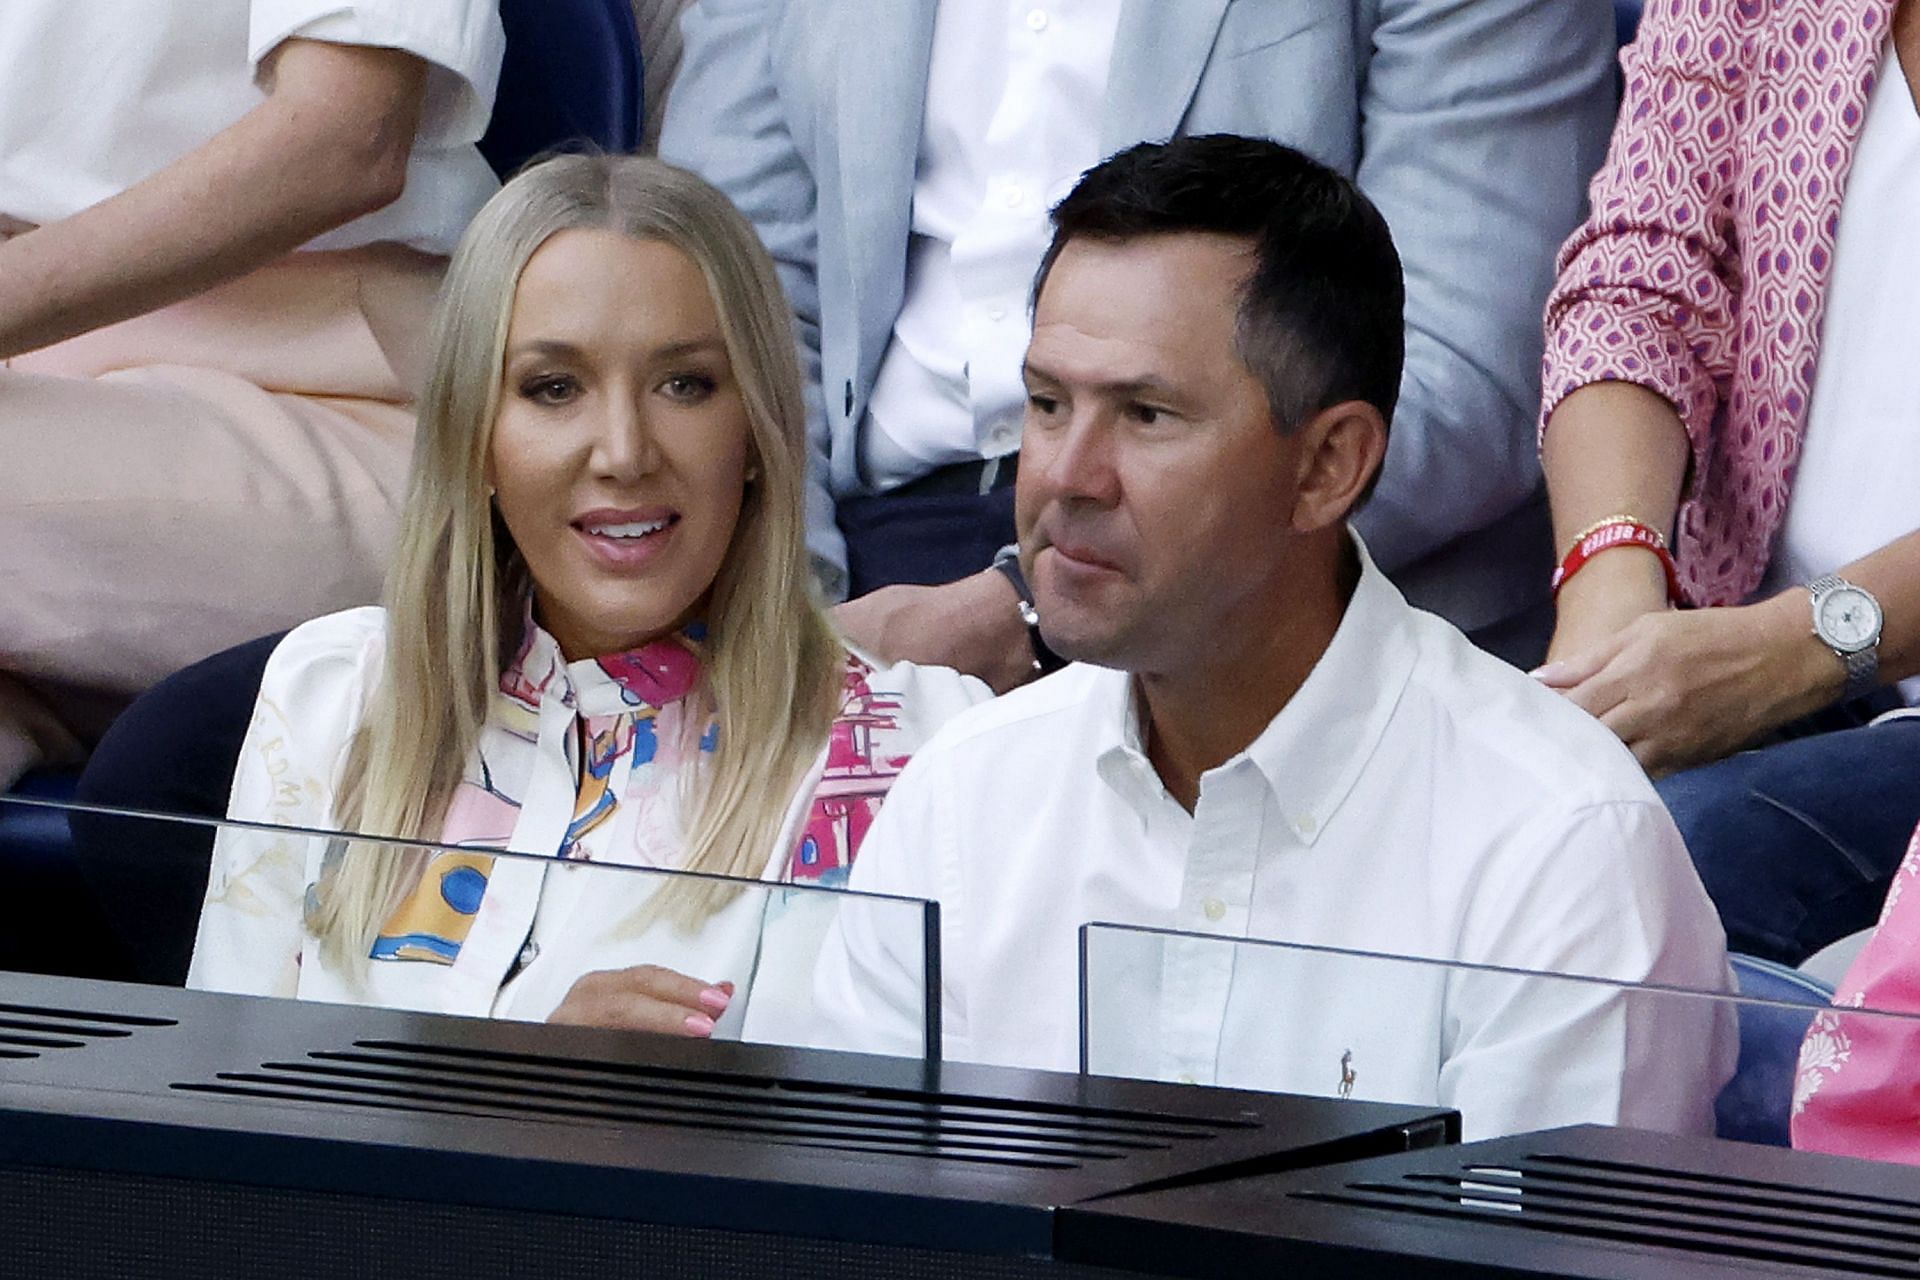 Former Australian cricket captain Ricky Ponting and his wife